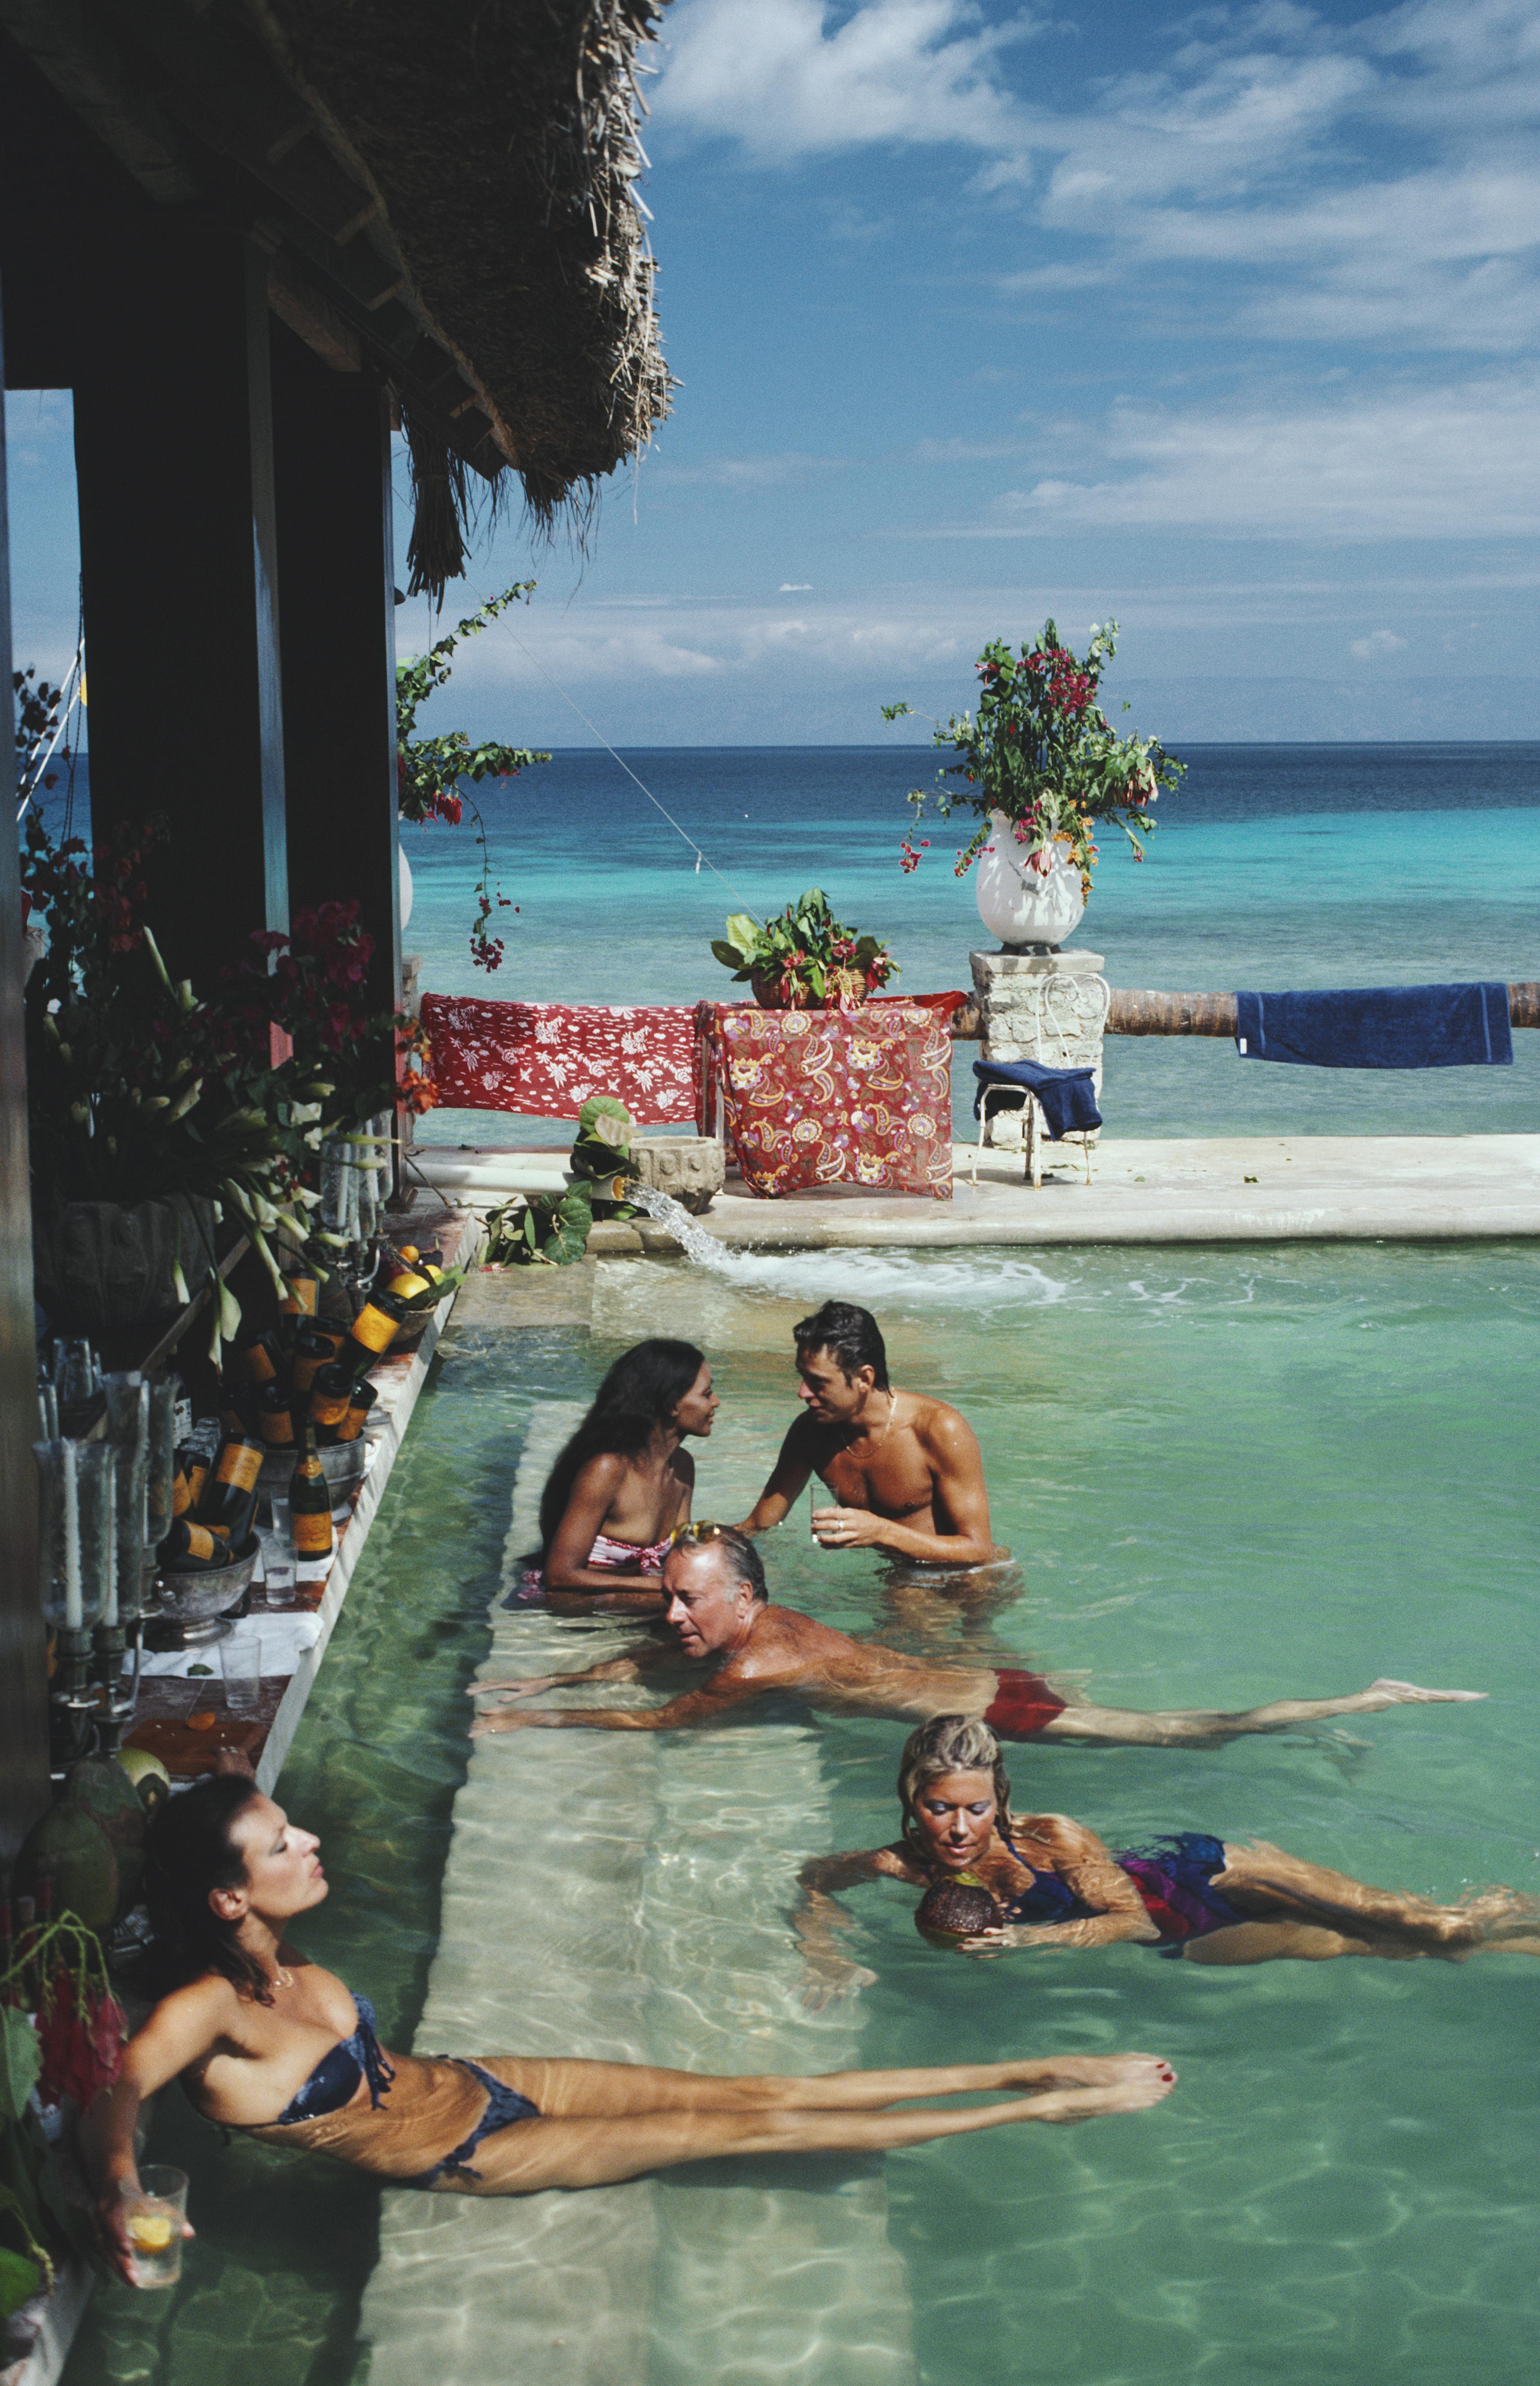 'Plantation Cocoyer' 1981 Slim Aarons Limited Estate Edition

People relaxing in the bar at Plantation Cocoyer, Cocoyer Beach, Haiti, February 1981. (Photo by Slim Aarons)

C Print
Produced from the original transparency
Certificate of authenticity